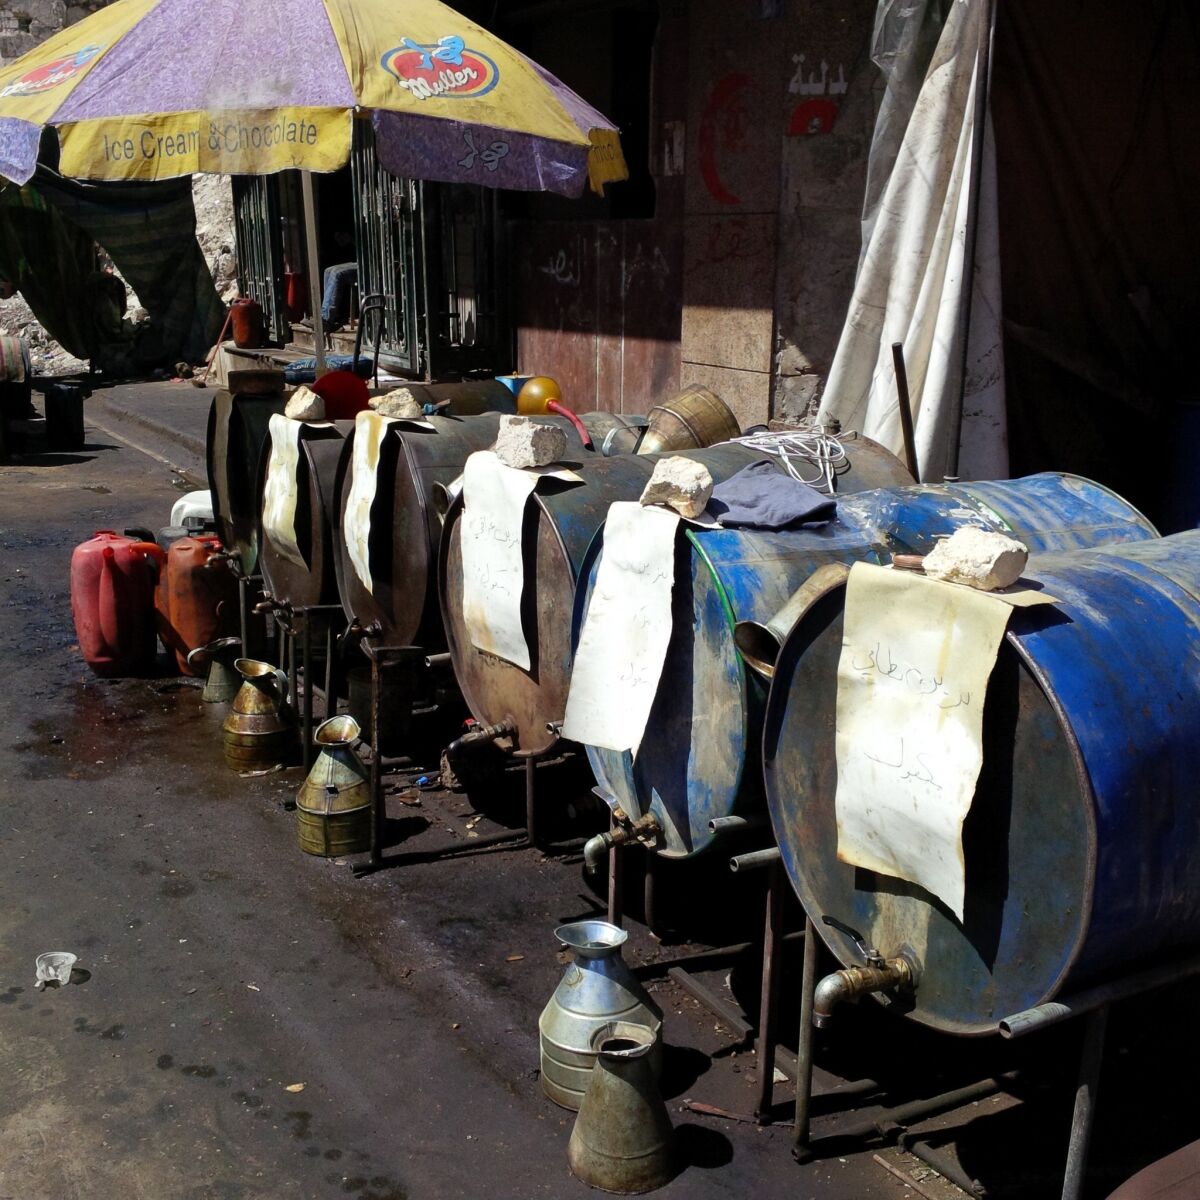 A makeshift gas station provides different varieties of fuel.